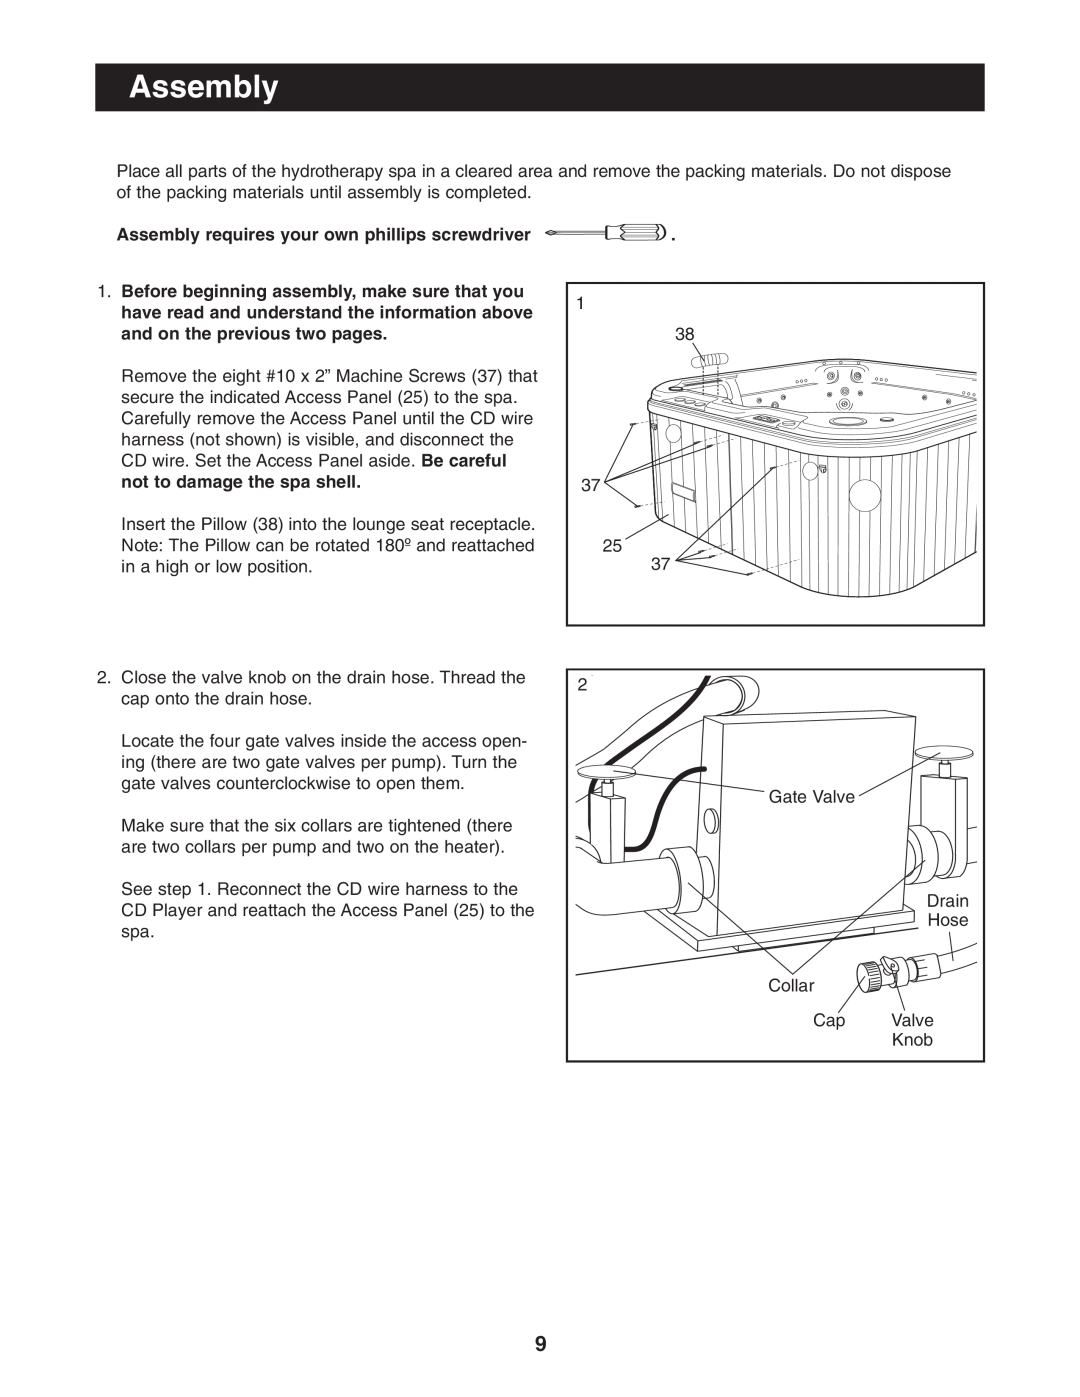 Image IMSB53950 user manual Assembly requires your own phillips screwdriver 